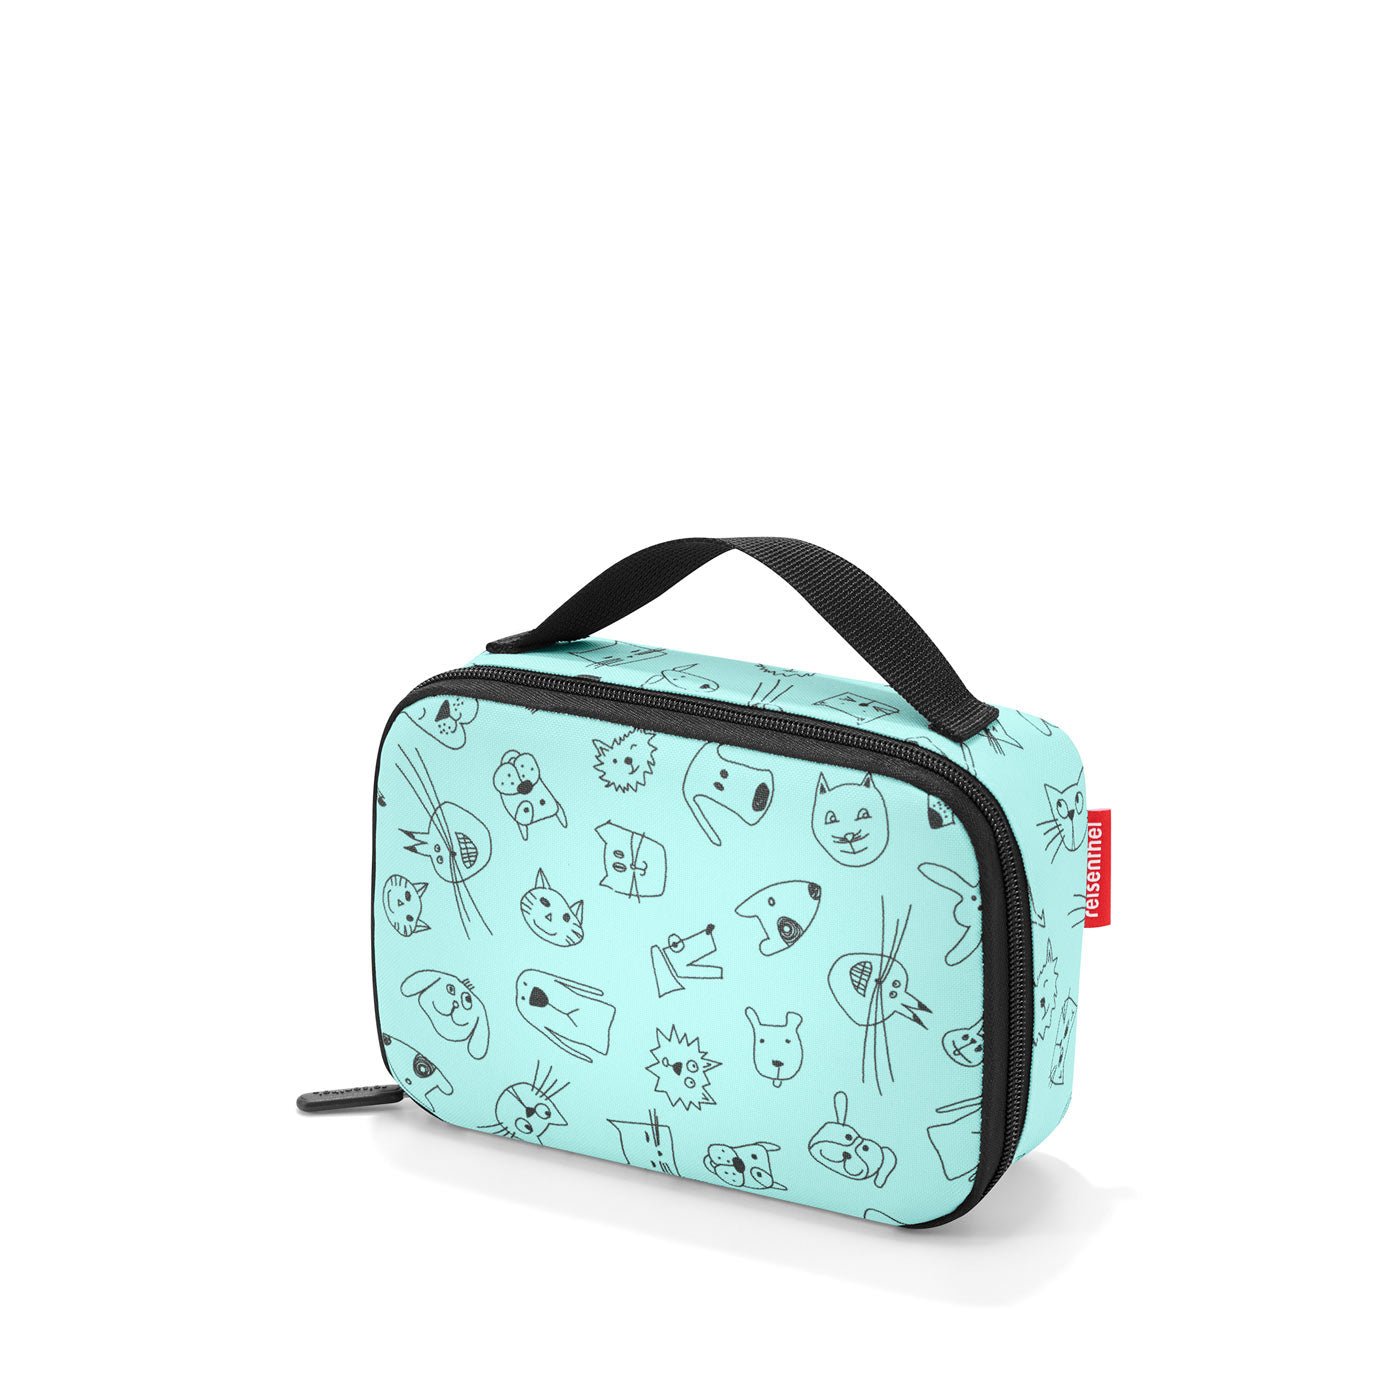 Reisenthel Lunchbox thermocase - cats & dogs mint - Familienbande